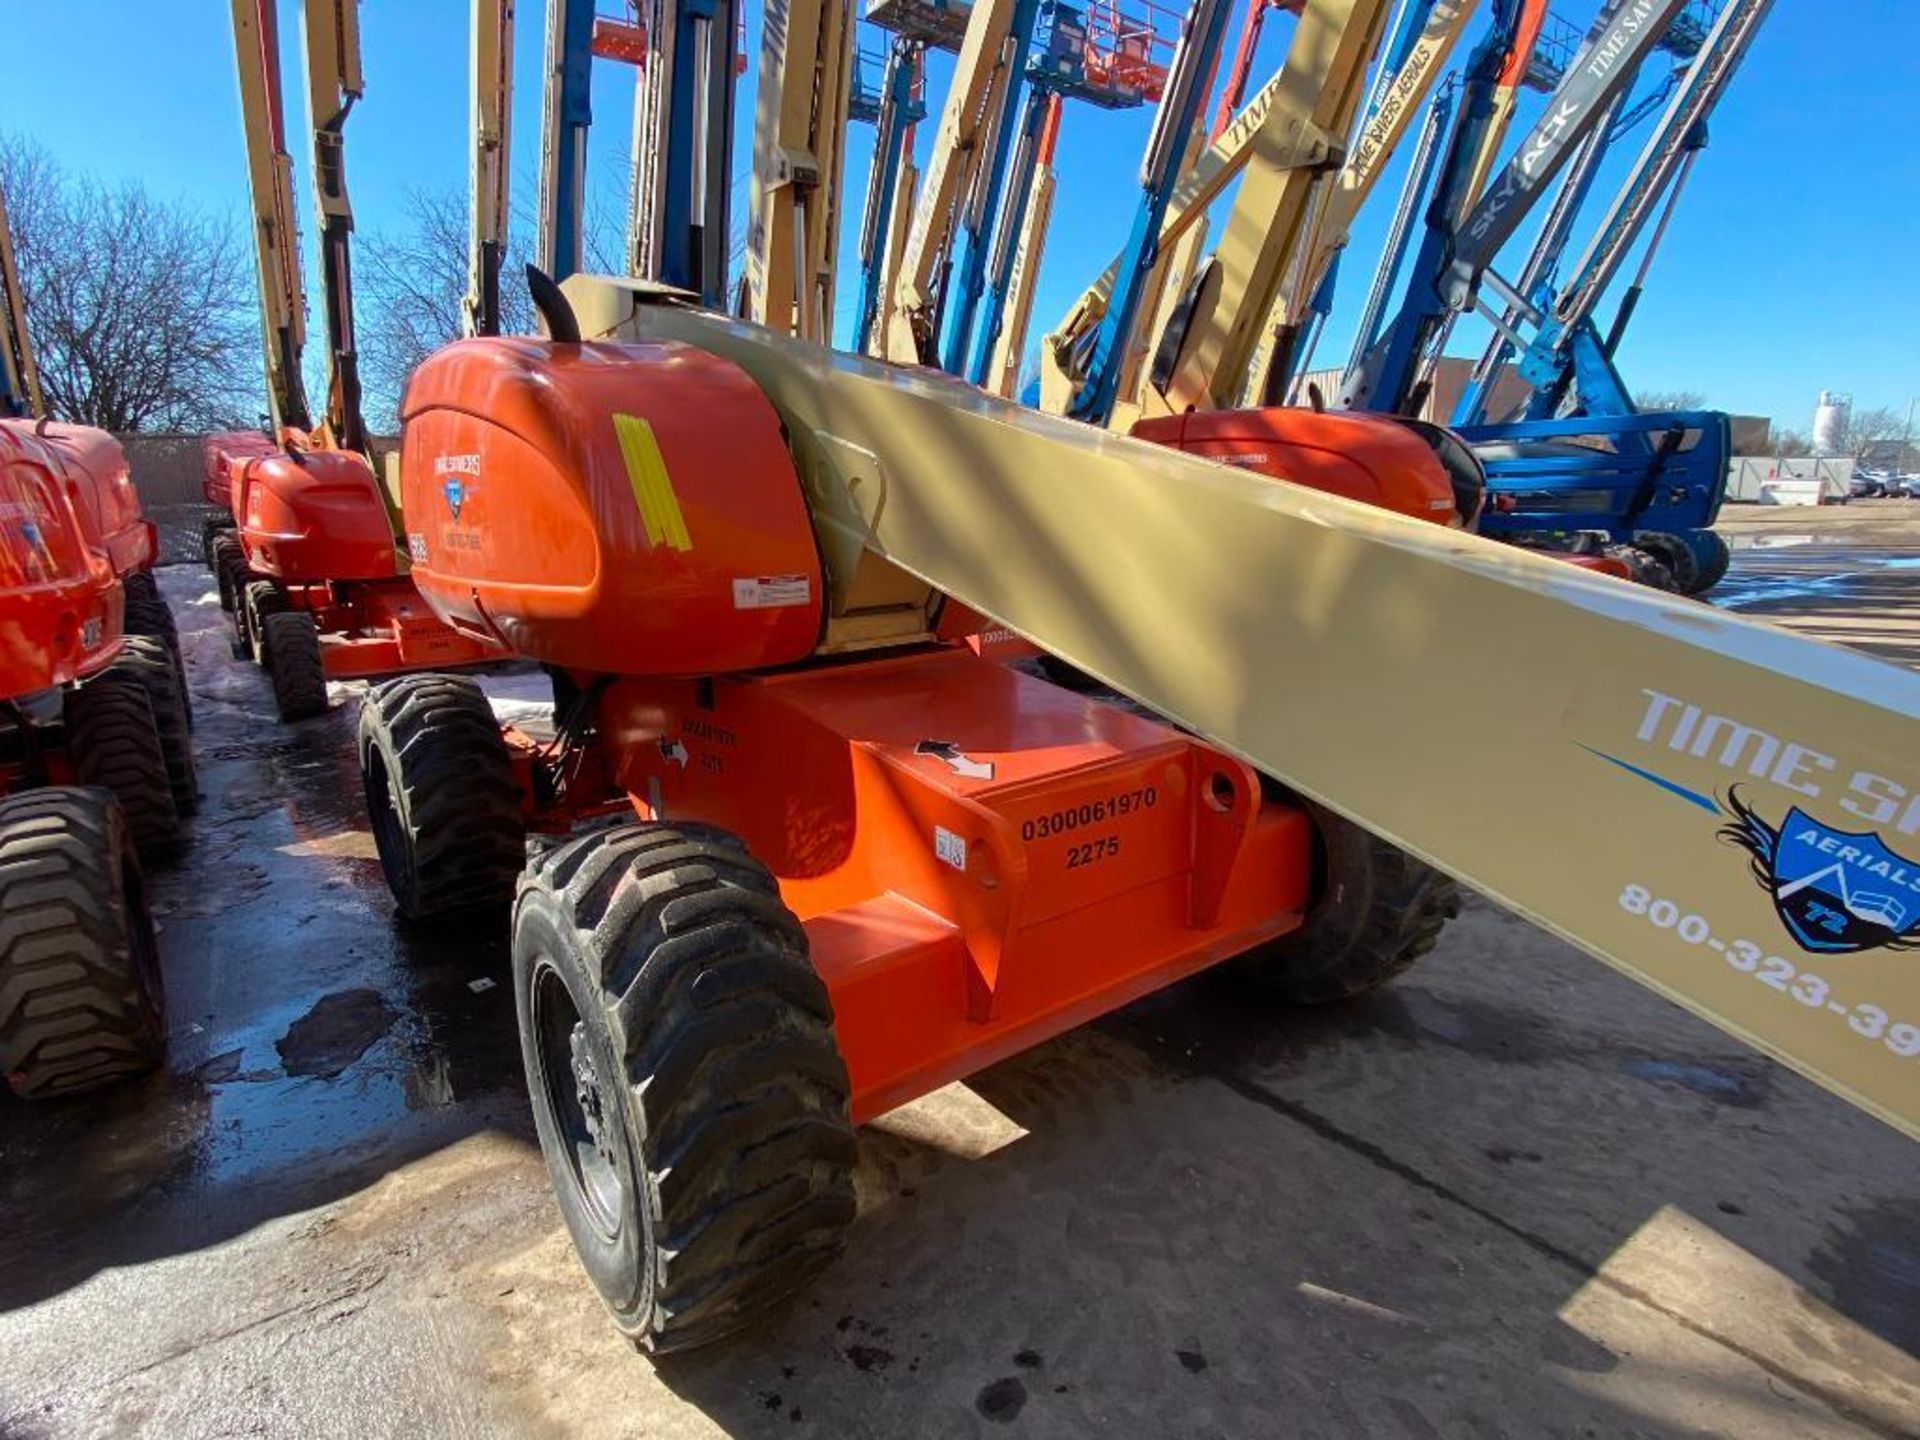 JLG 600S Rough Terrain Boom Lift (S/N 300061970, Year 2001), with 60' Platform Height, 49.47' - Image 9 of 16